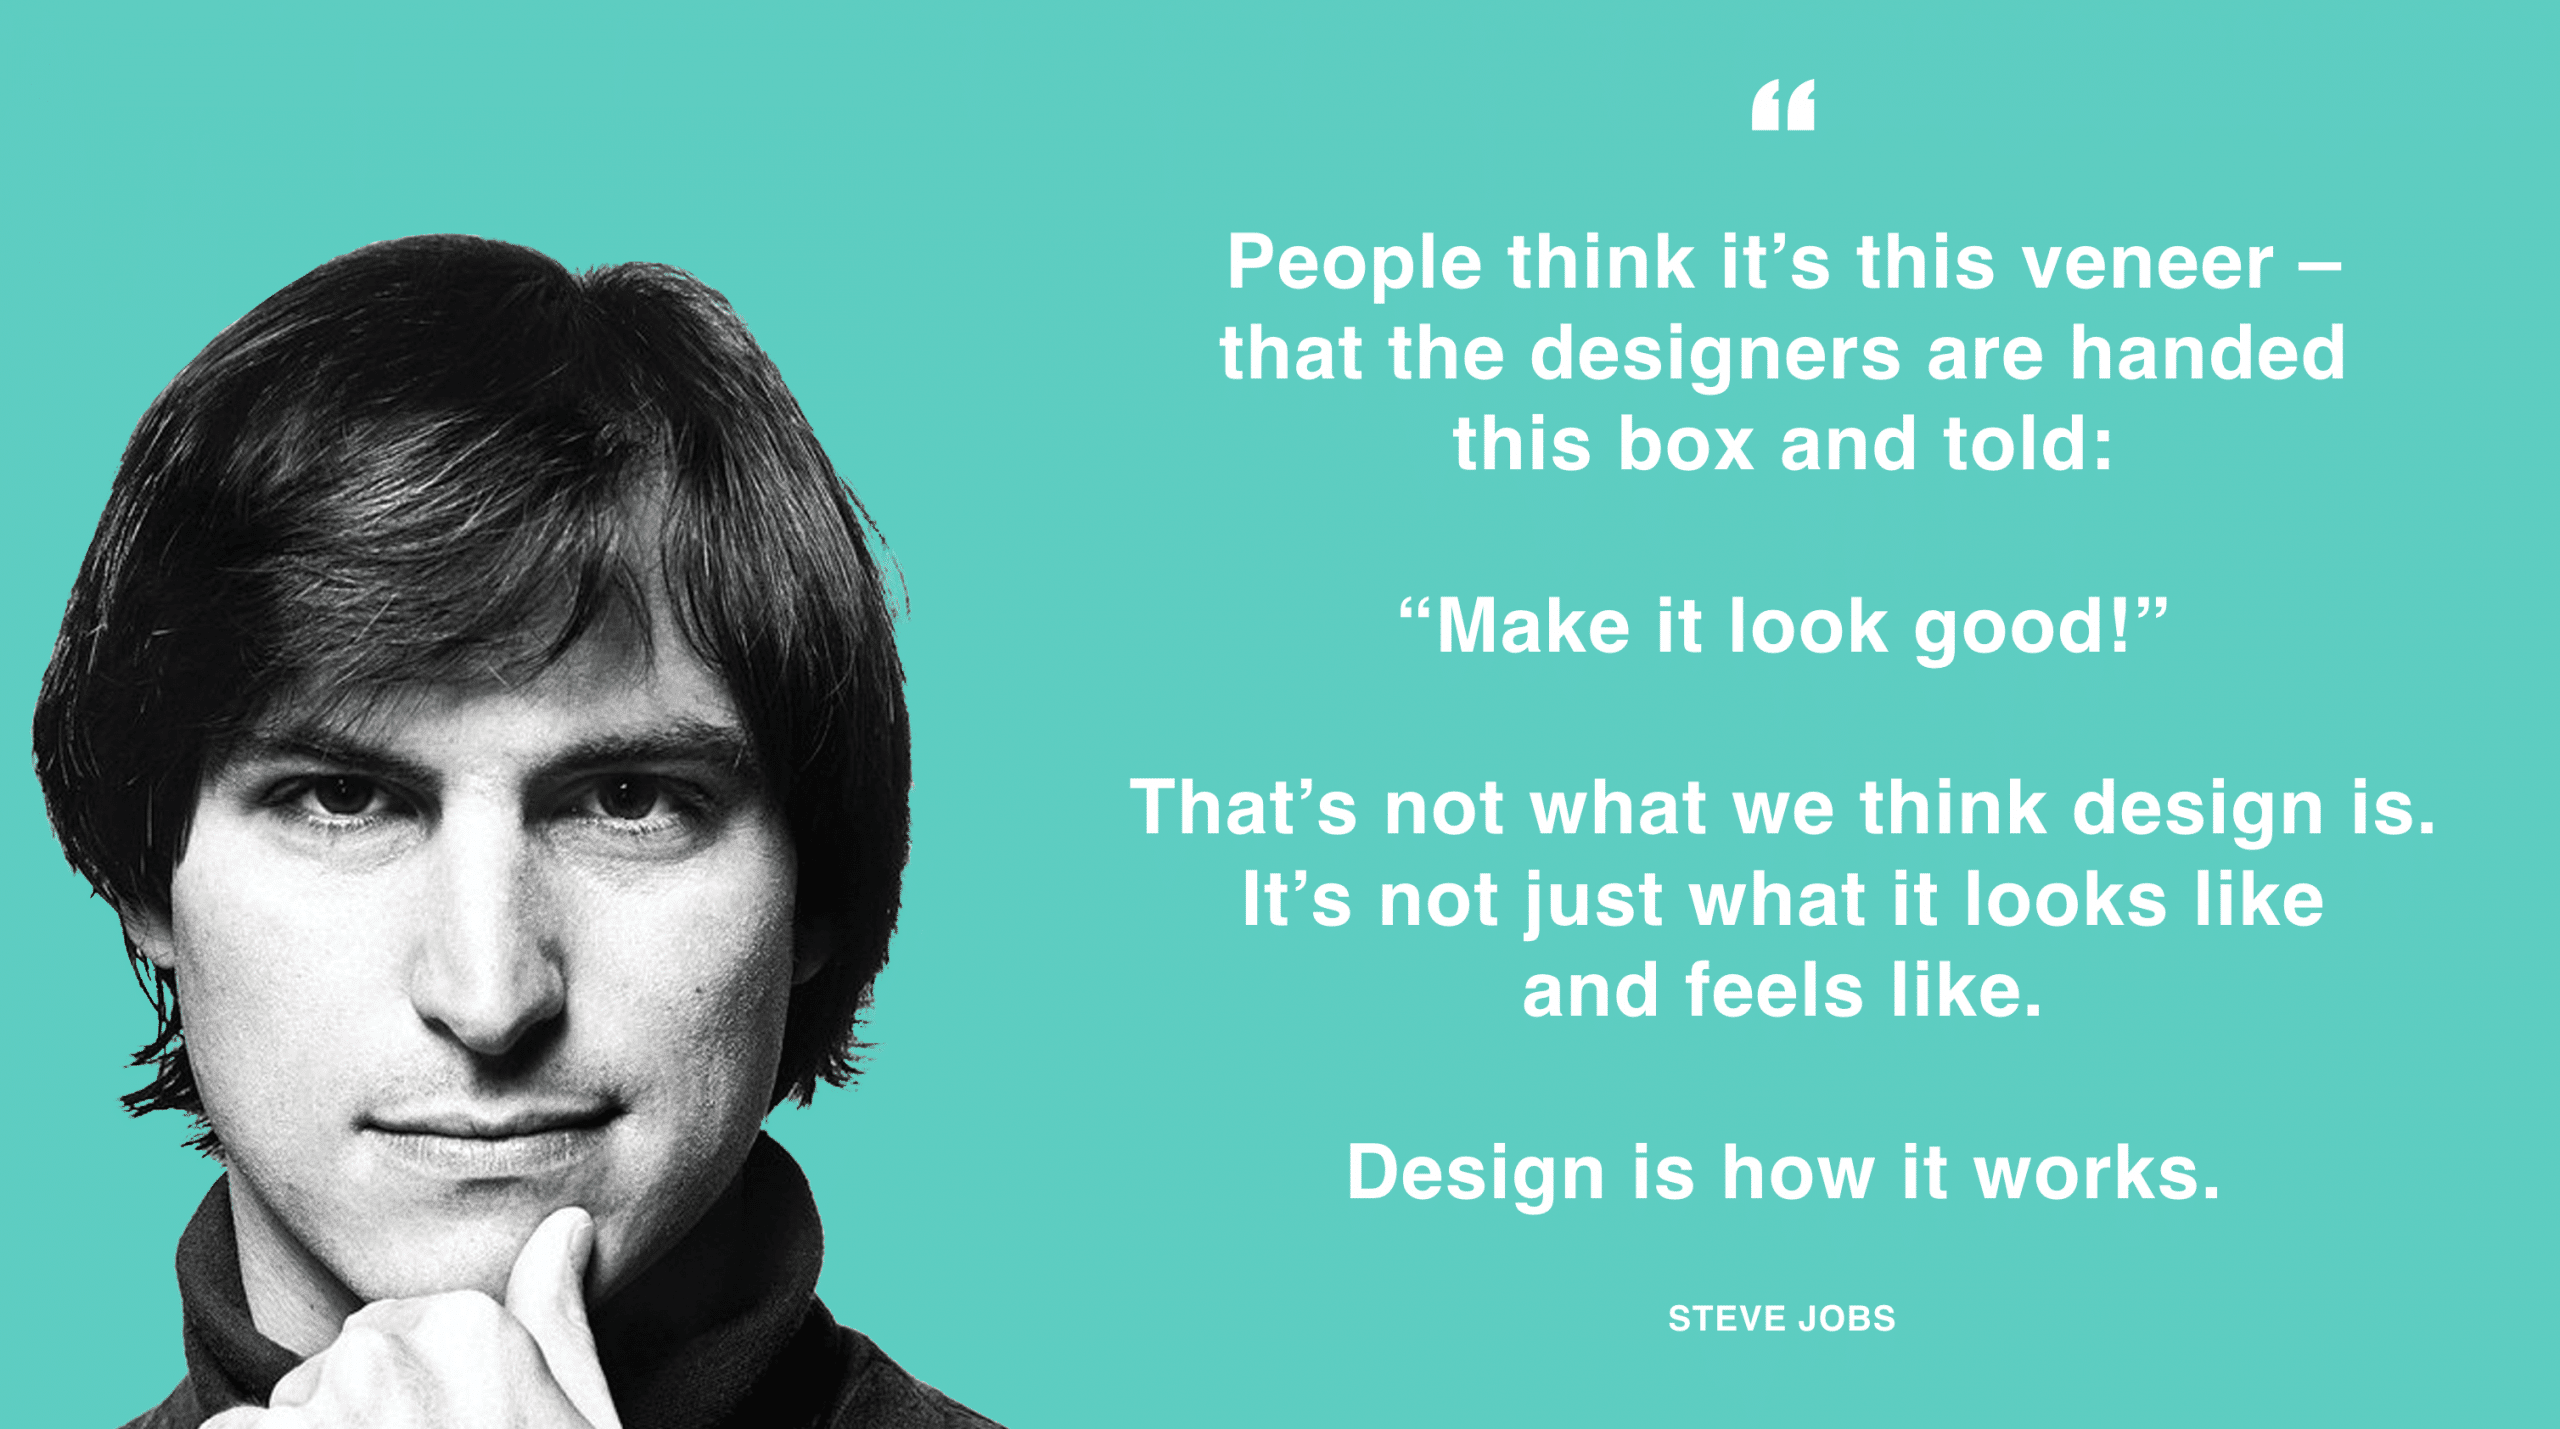 People think it's this veneer - that designers are handed this box and told: "Make it look good!" That's not what we think design is. It's not just what it looks like and feels like. Design is how it works. - Steve Jobs